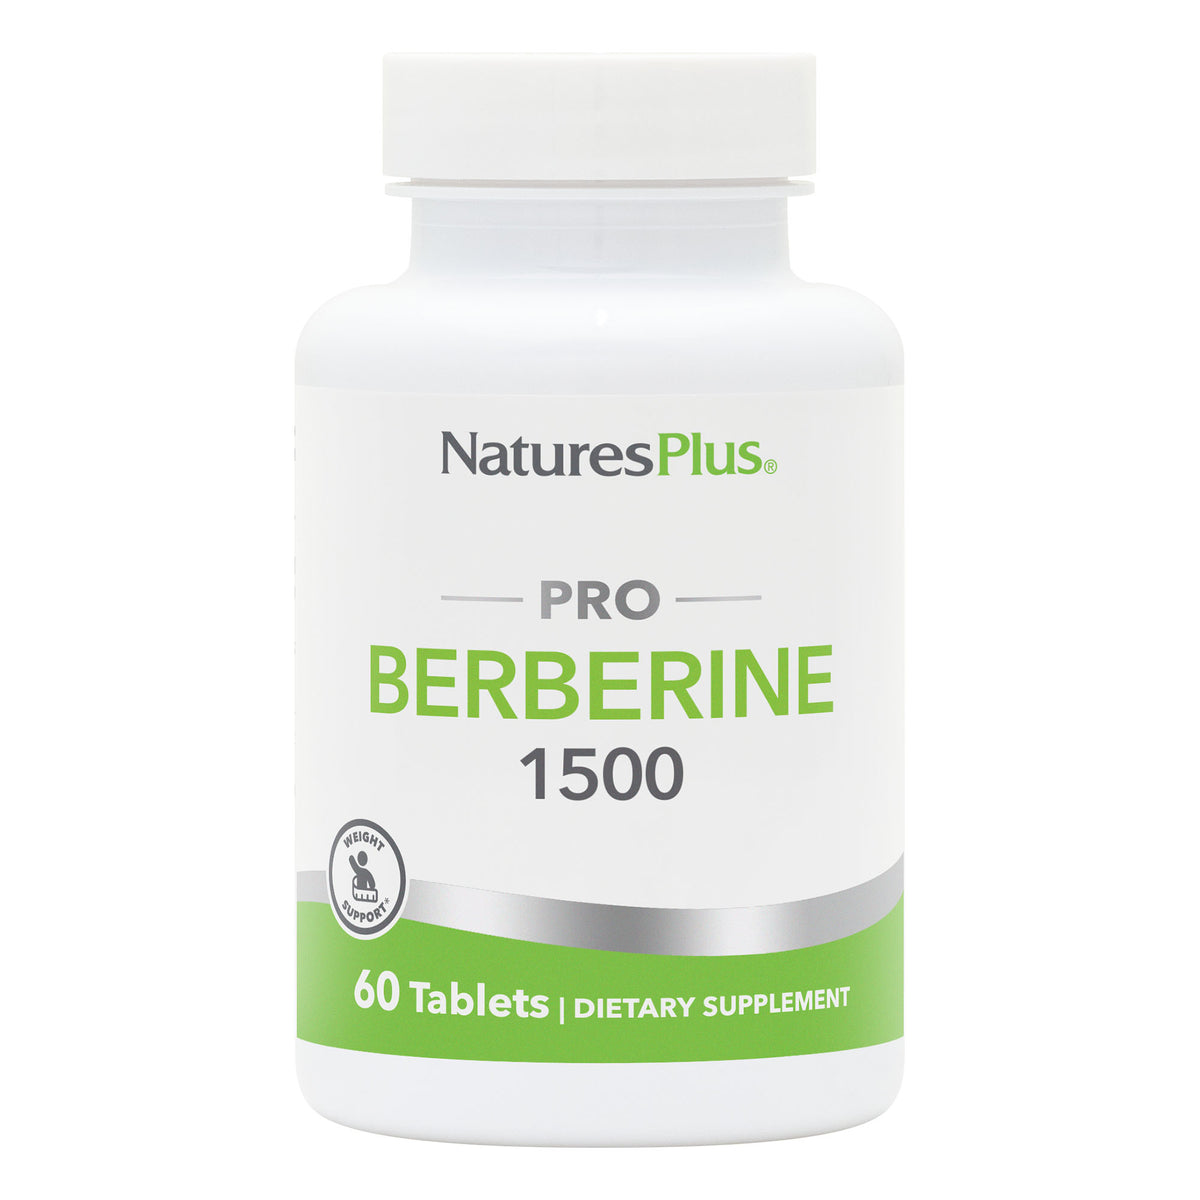 product image of NaturesPlus PRO Berberine 1500 MG Tablets containing 60 Count